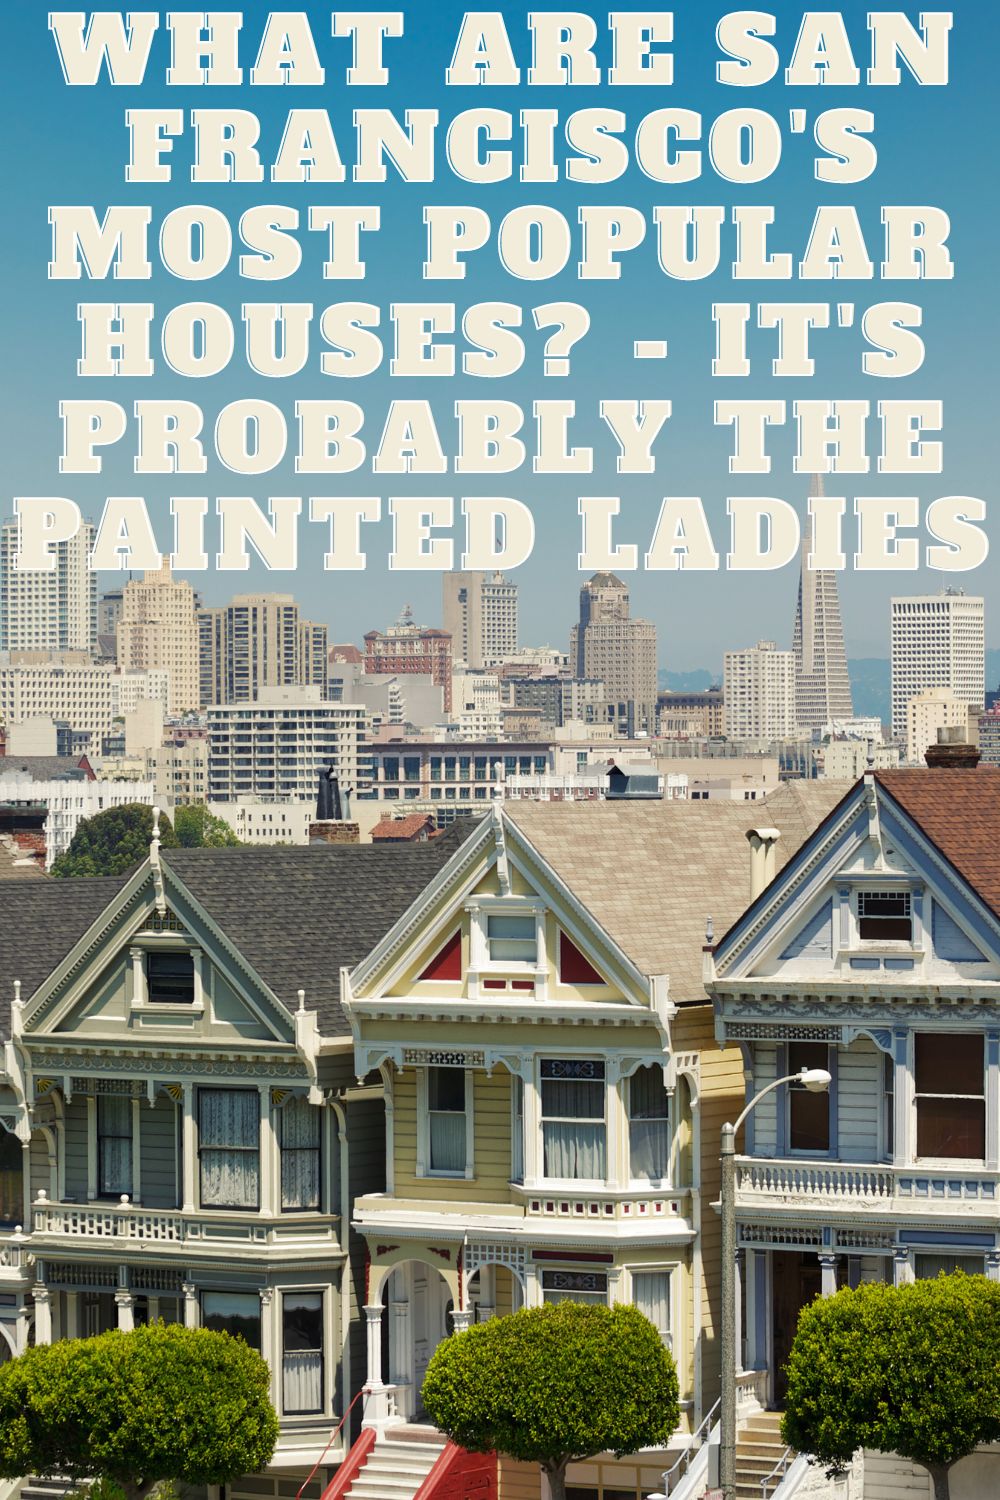 What Are San Francisco's Most Popular Houses? - Its Probably the Painted Ladies